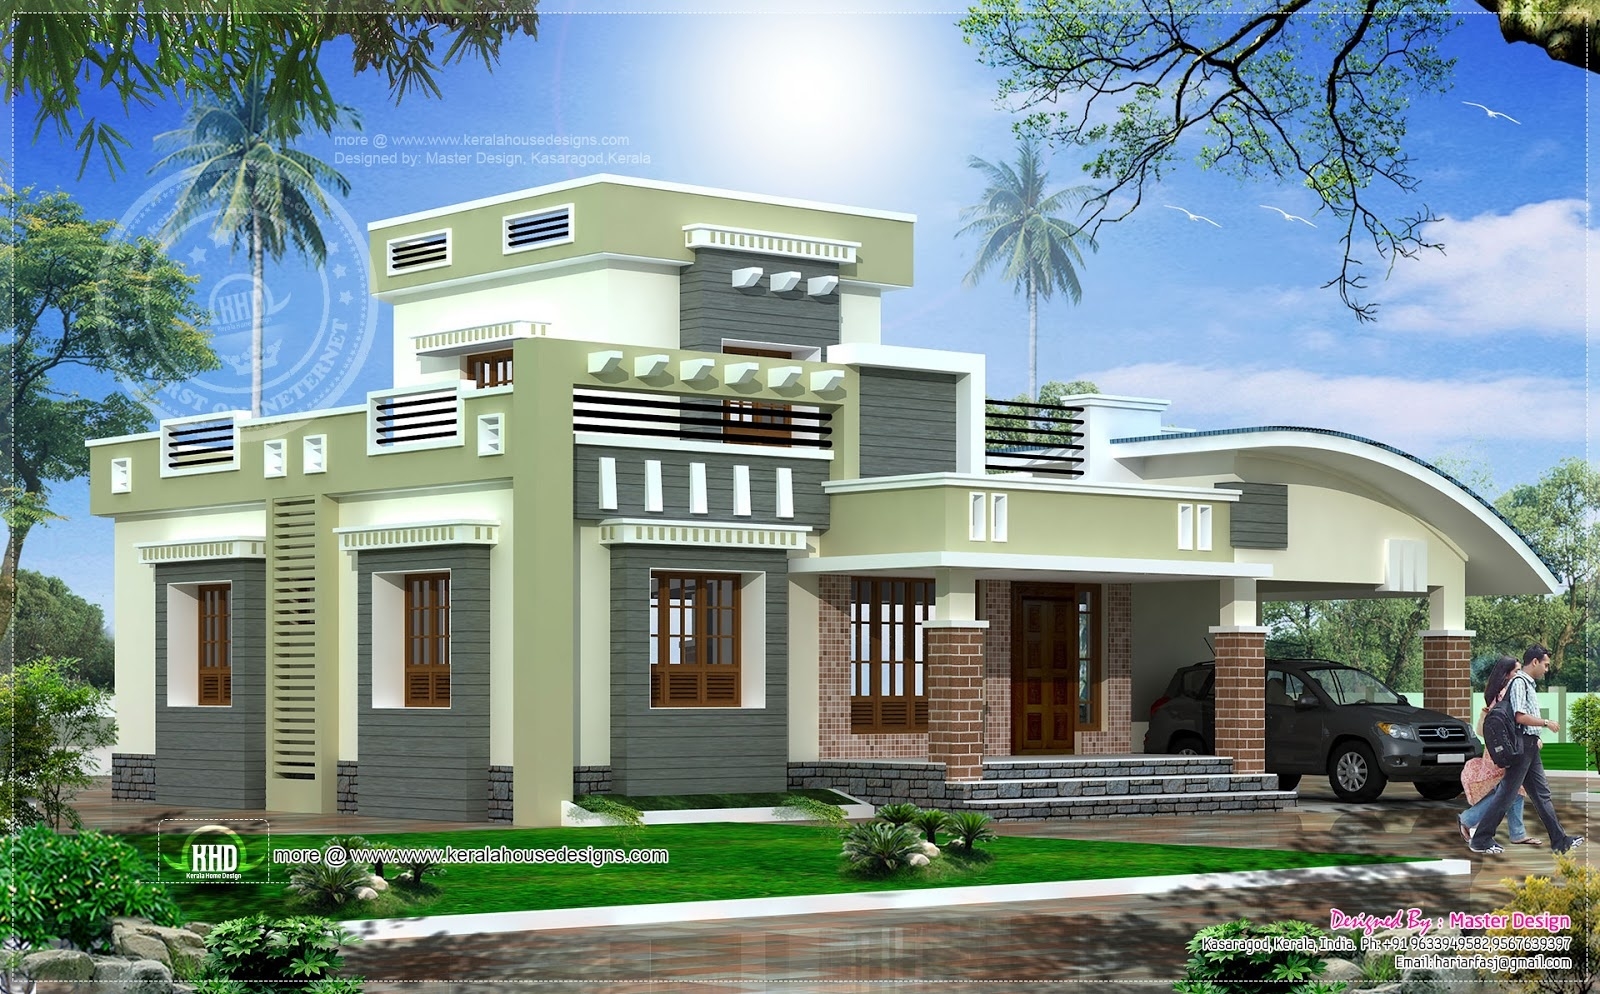 Remarkable single floor 2 bedroom house in 1628 sq feet kerala home design and intended for classy home images single floor